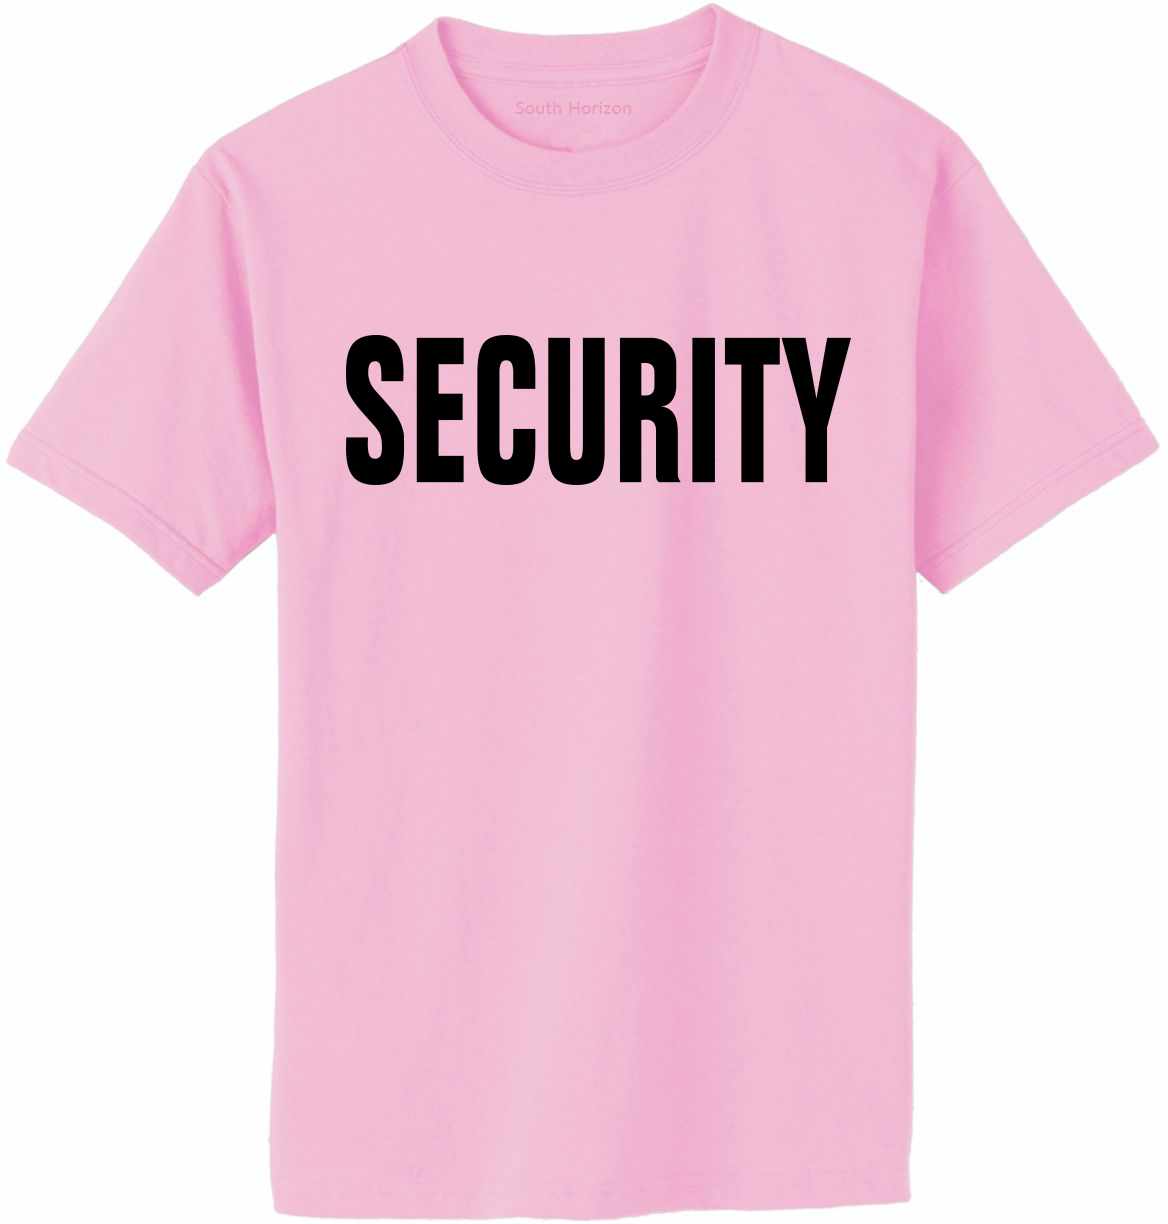 SECURITY (2 sided) Adult T-Shirt (#34-1)